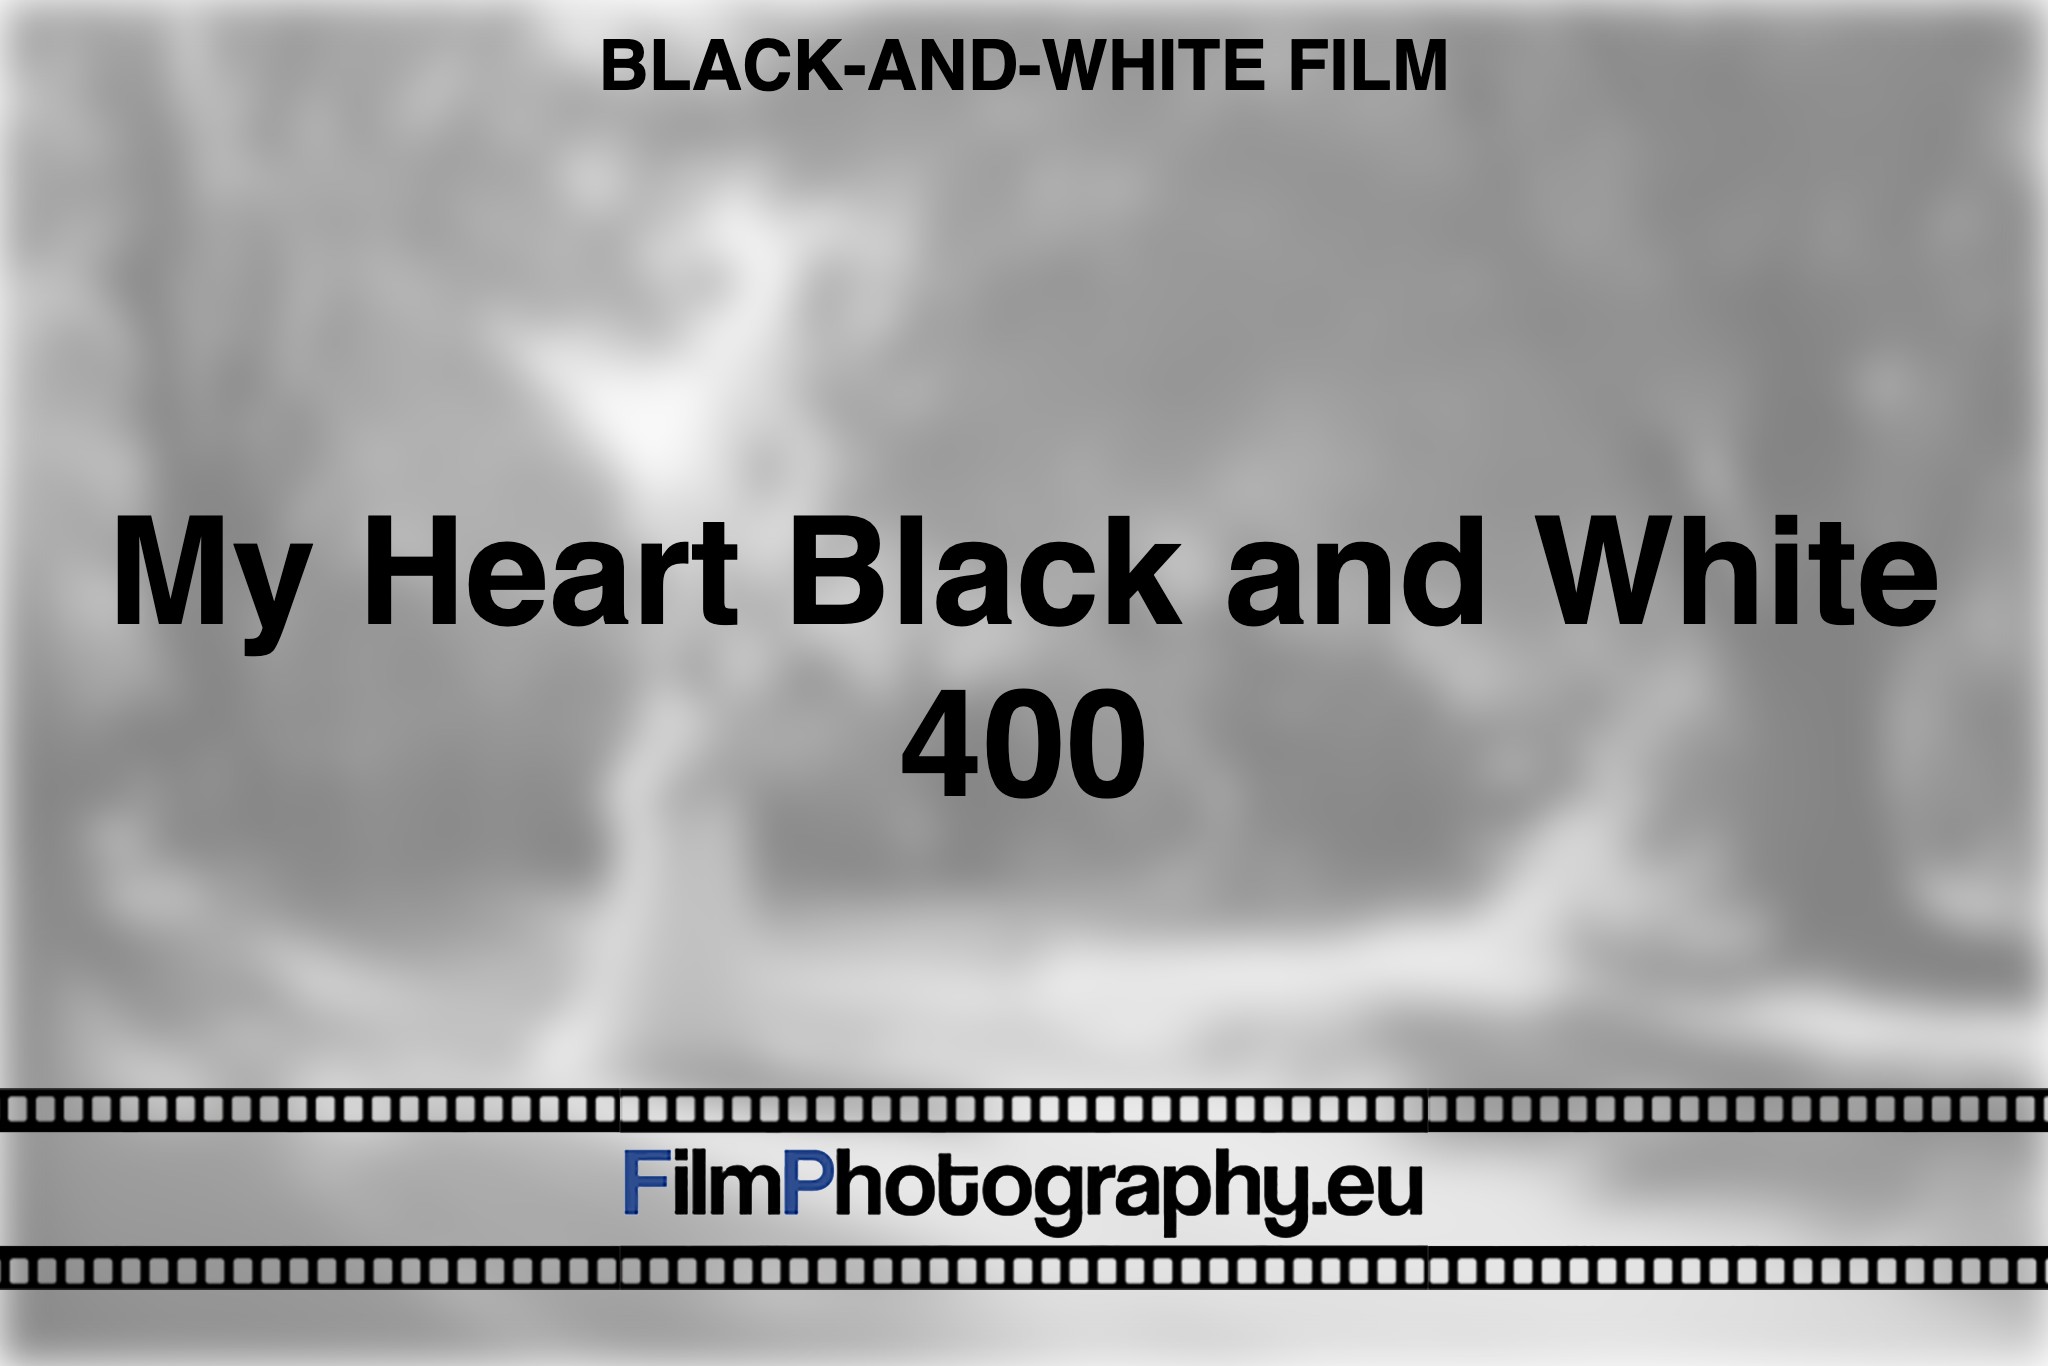 my-heart-black-and-white-400-black-and-white-film-bnv